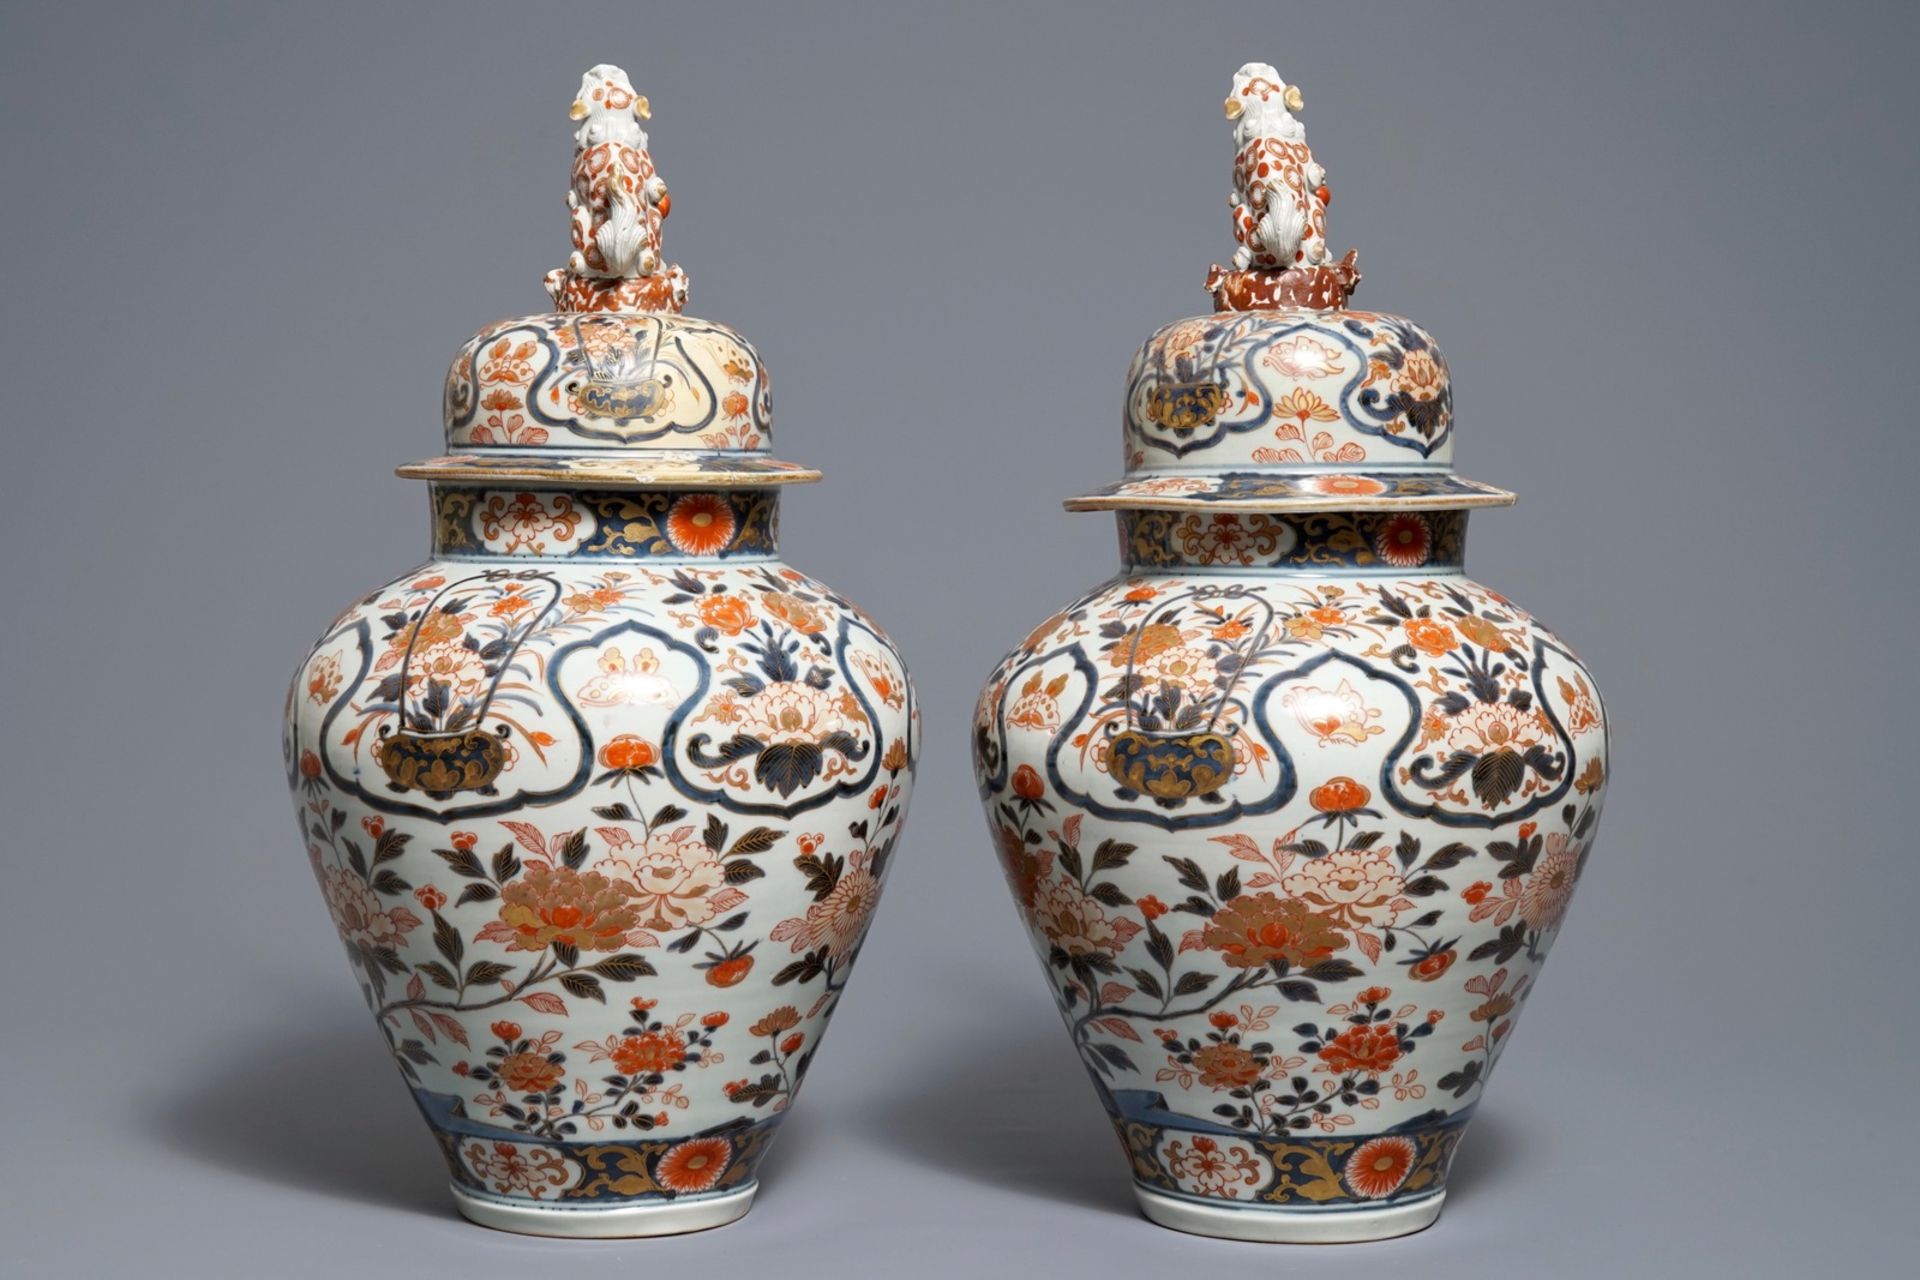 A pair of Japanese Imari vases and covers with floral design, Edo, 17th C. - Image 2 of 6